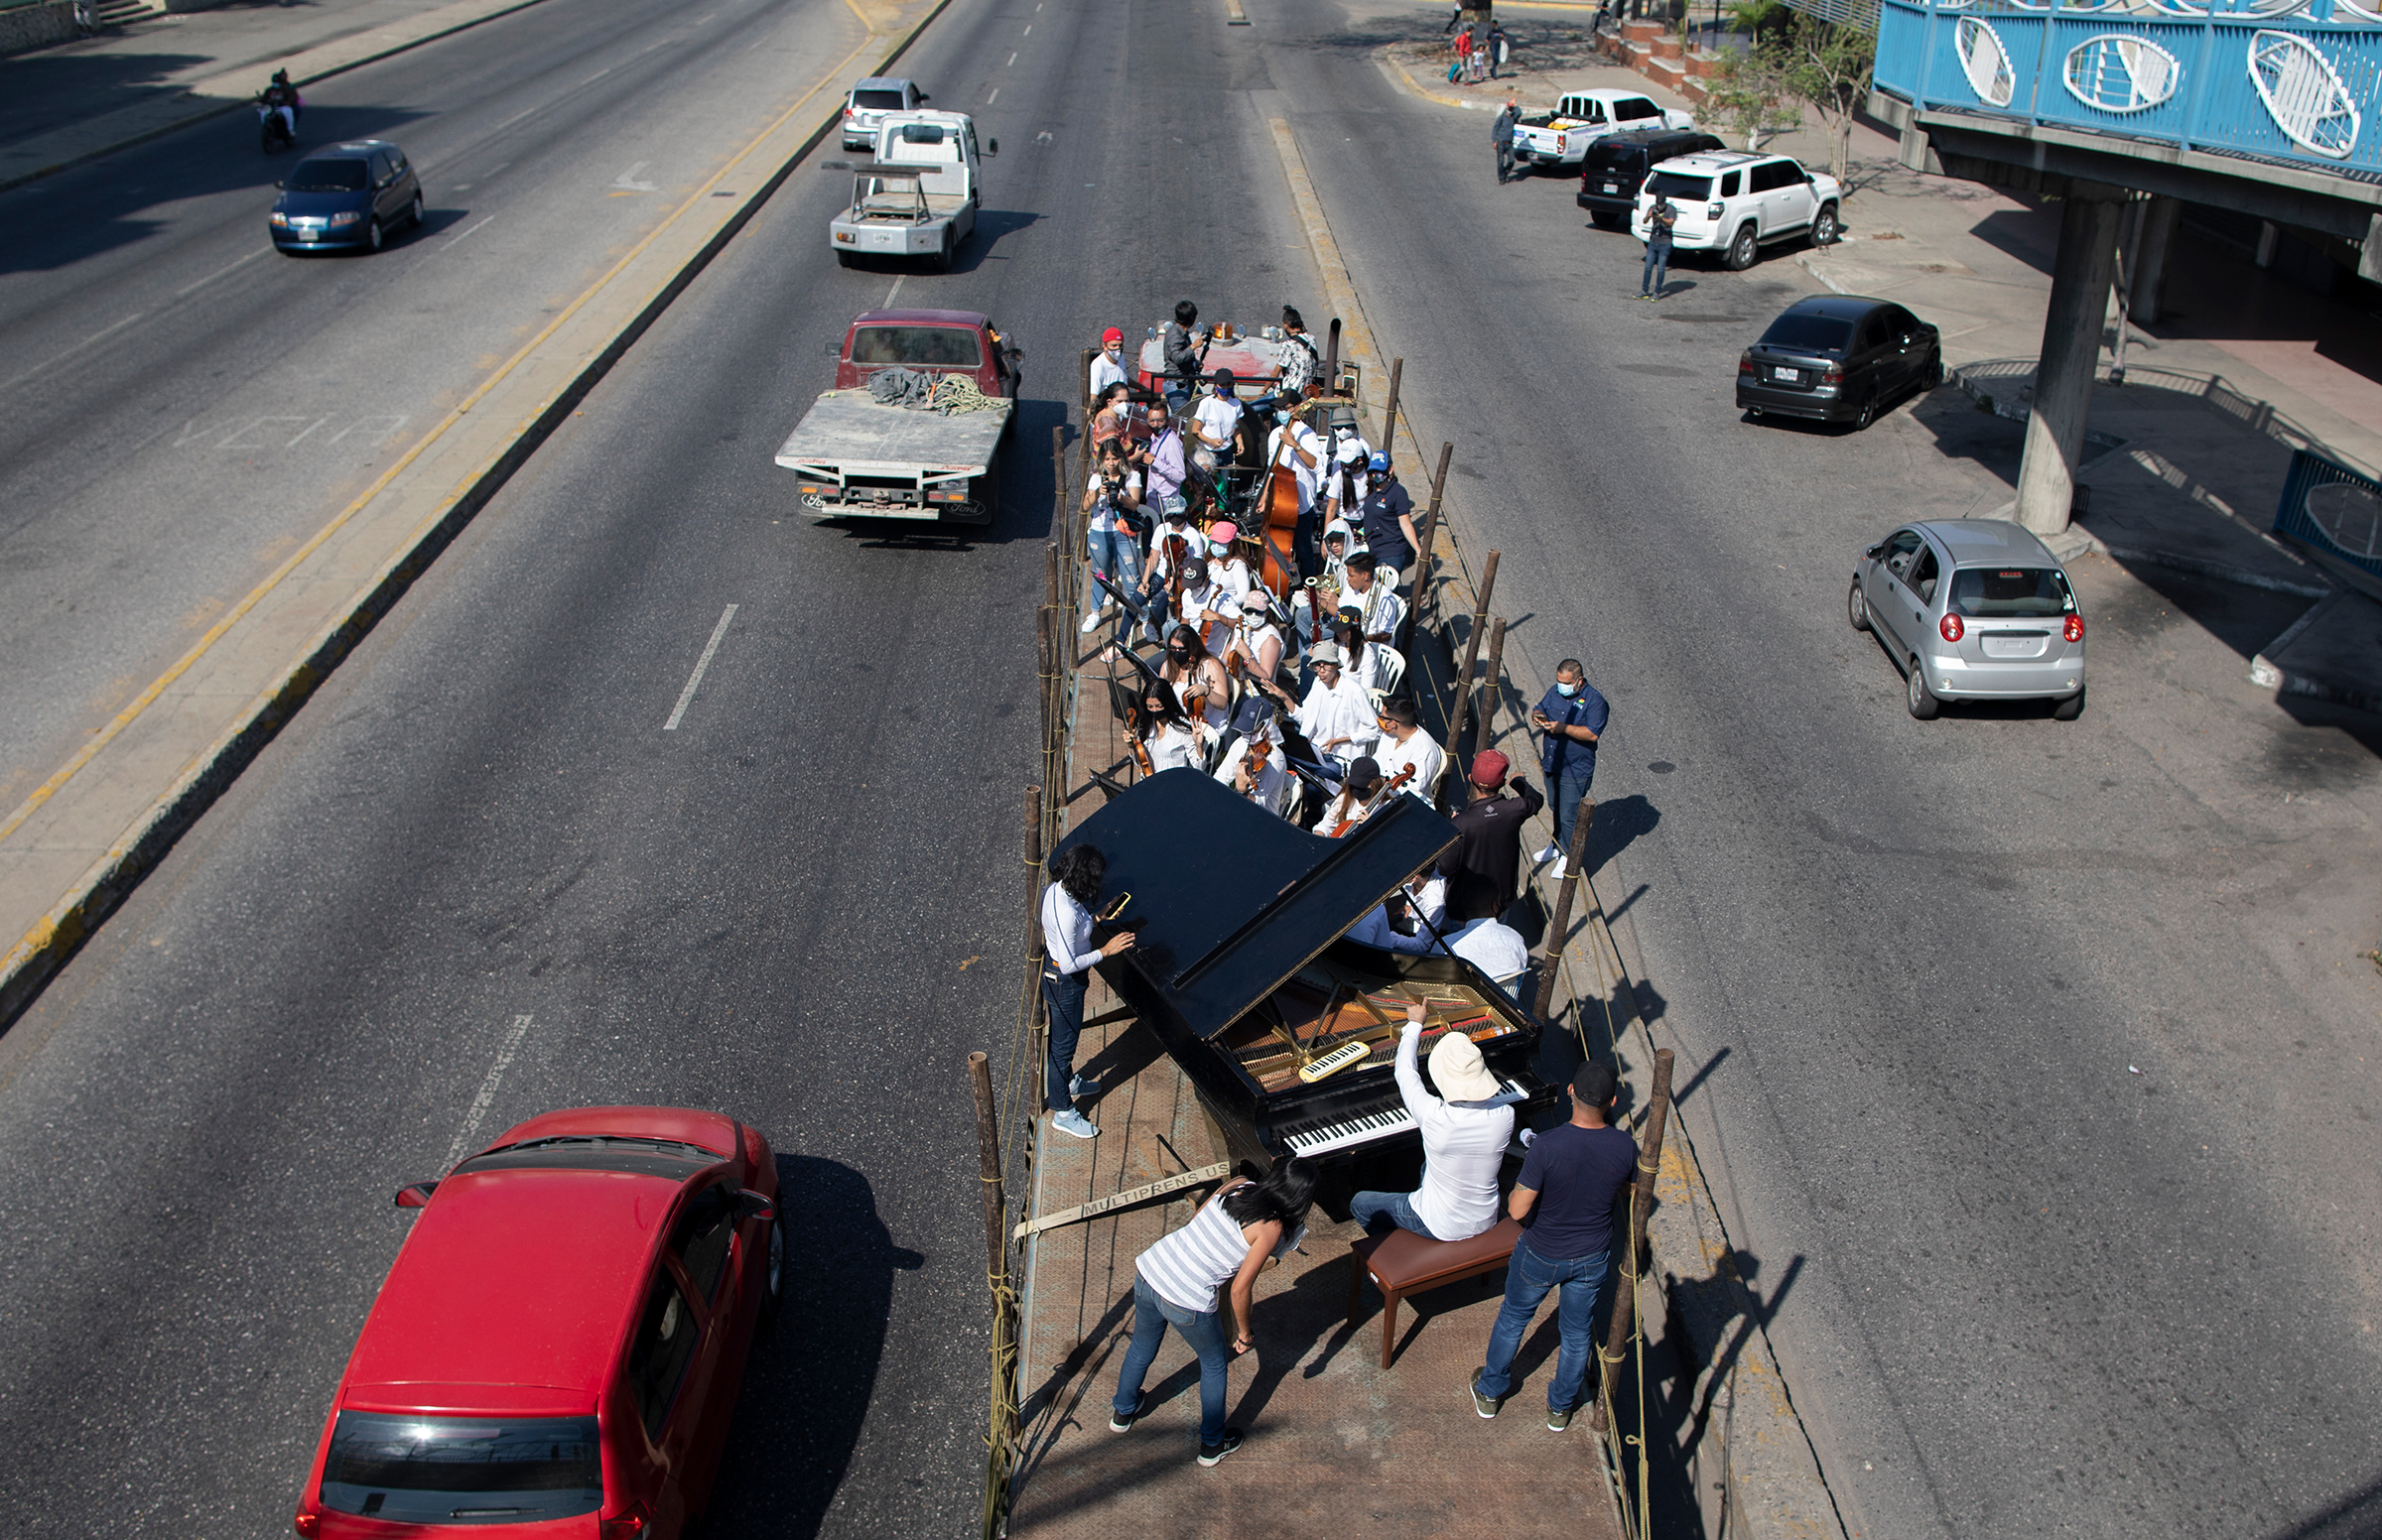 Musicians join pianist, composer and conductor José Agustín Sánchez on a truck bed for a "musical disinfection" in Barquisimeto, northwestern Venezuela, on March 4, 2021. Sanchez, who last year started playing what he calls his "Musical Vaccine" for COVID-19 patients, is now joined by other musicians as they ride through the city playing his original compositions for anybody who wants to listen.